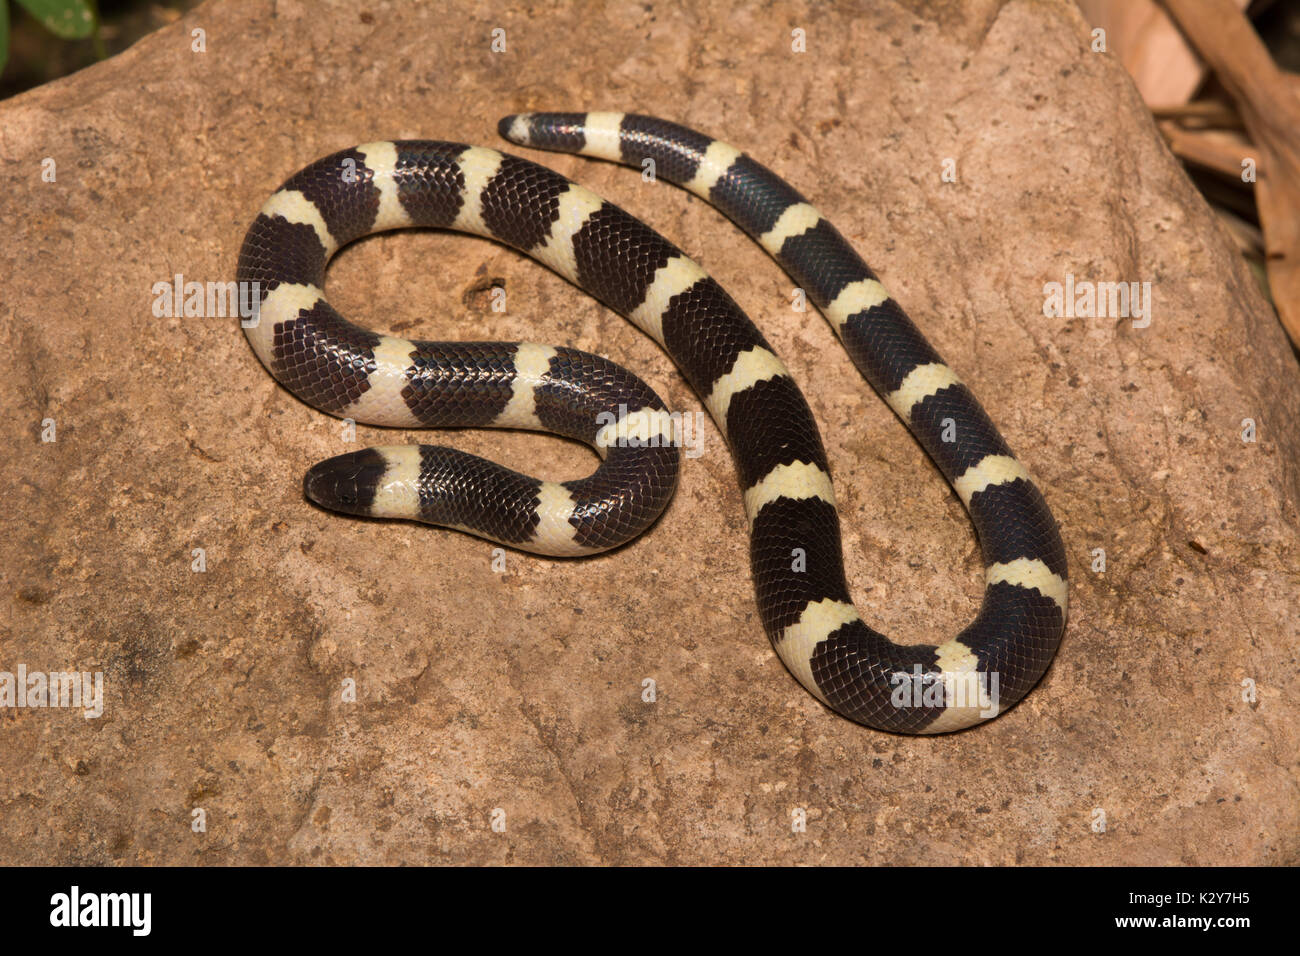 Mexican Short-tailed Snake (Sympholis lippiens) from Sonora, México. Stock Photo